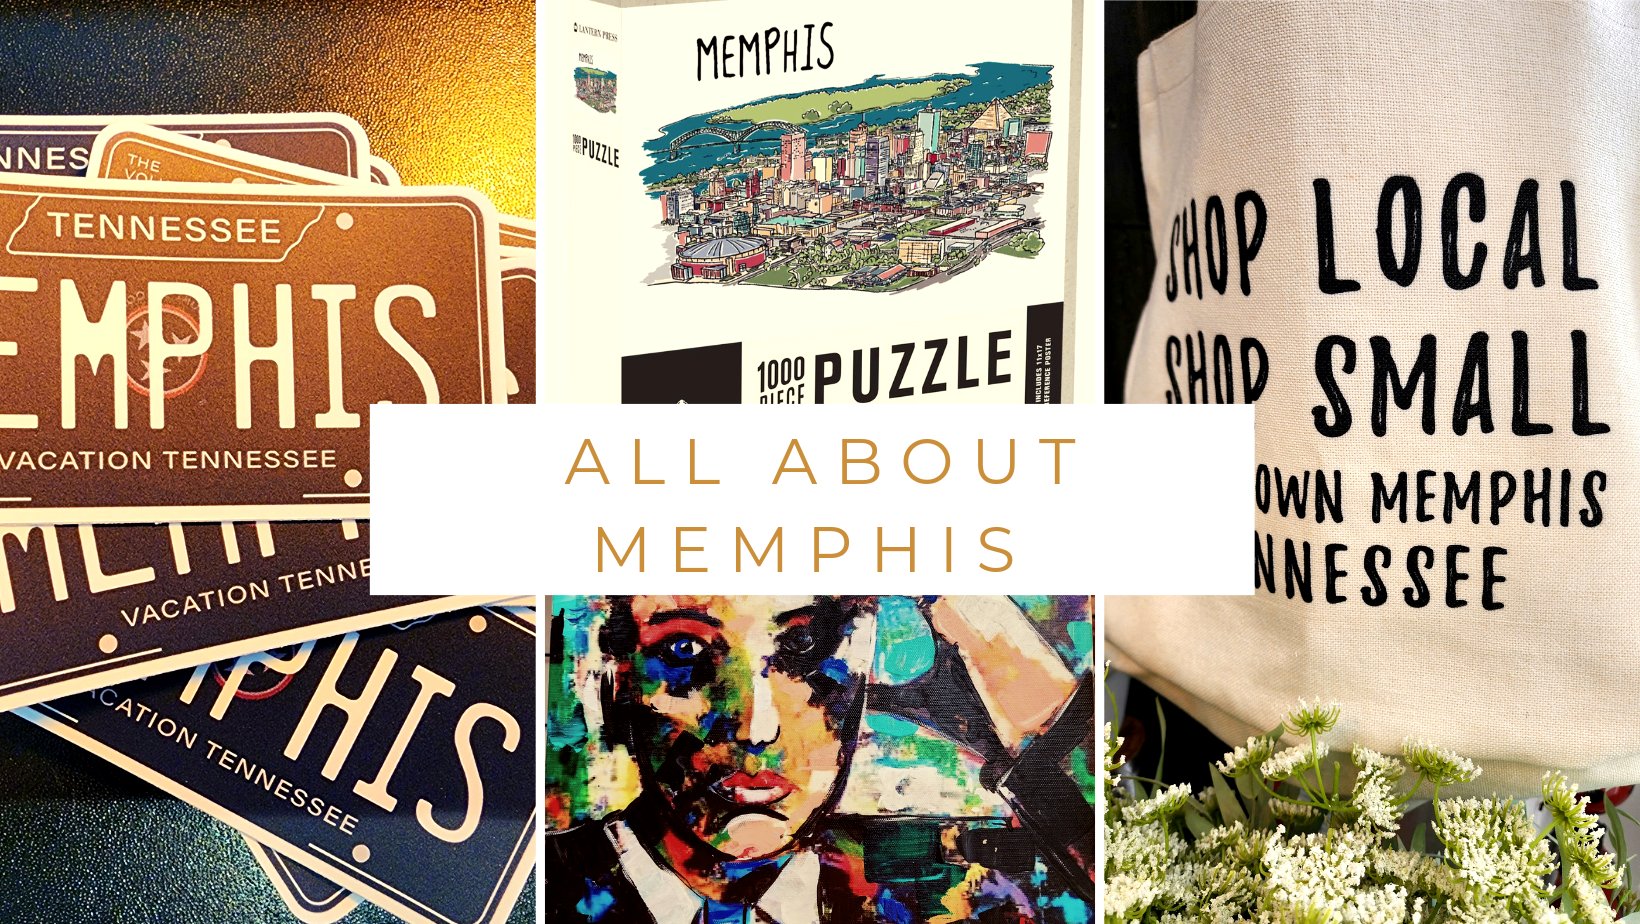 ALL ABOUT MEMPHIS